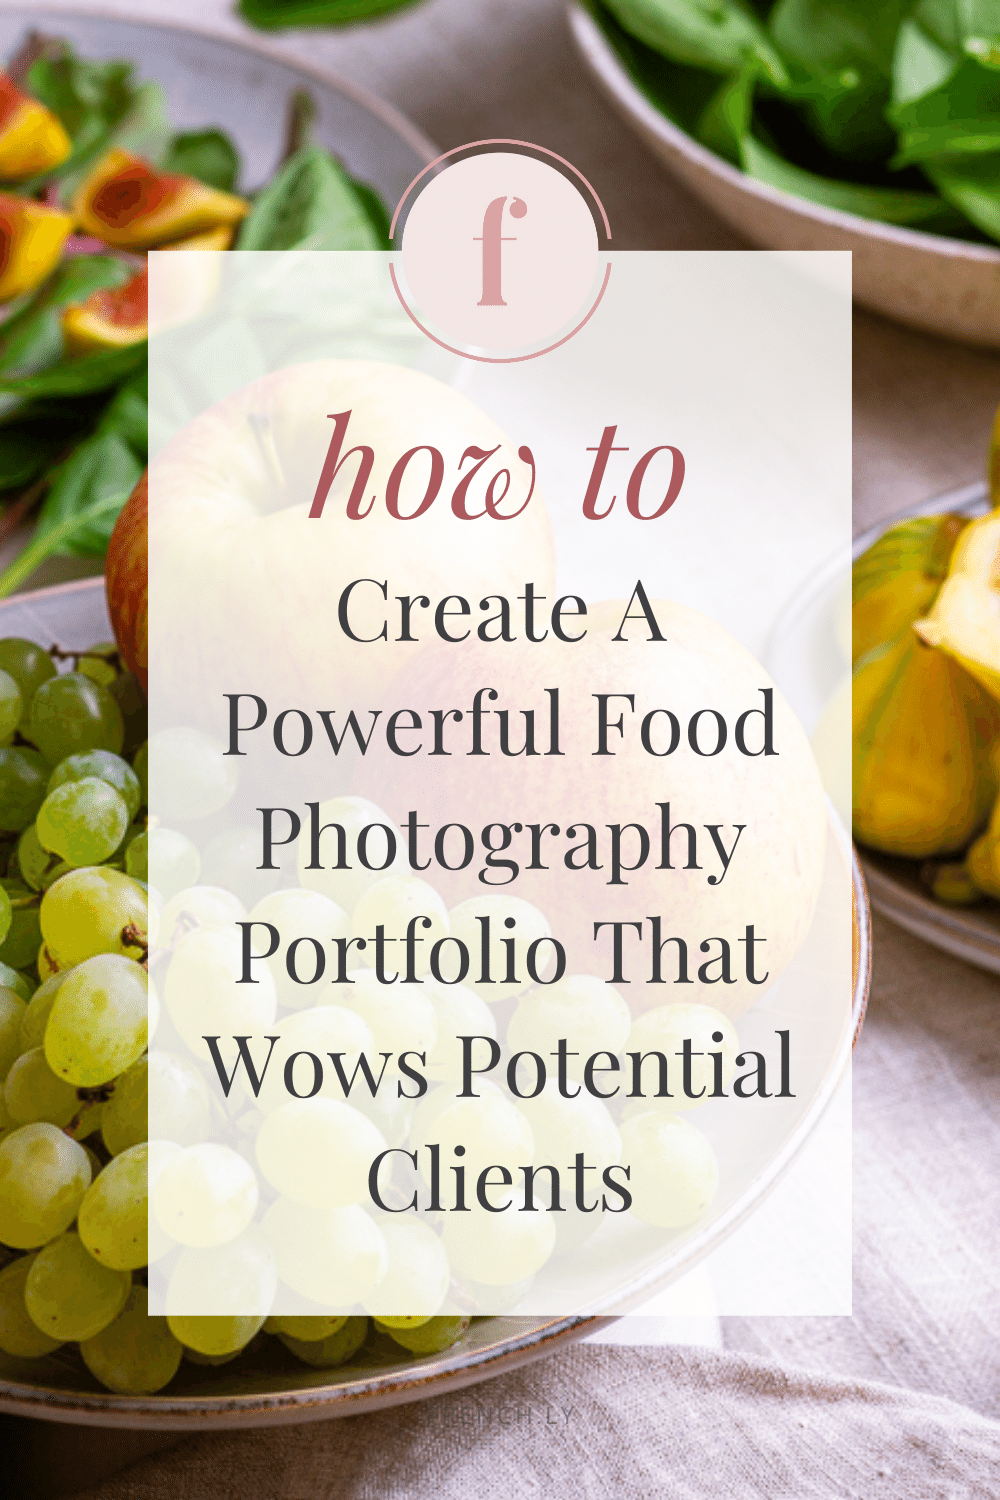 How To Create A Powerful Food Photography Portfolio That Wows Potential Clients | Frenchly Food + Product Photography